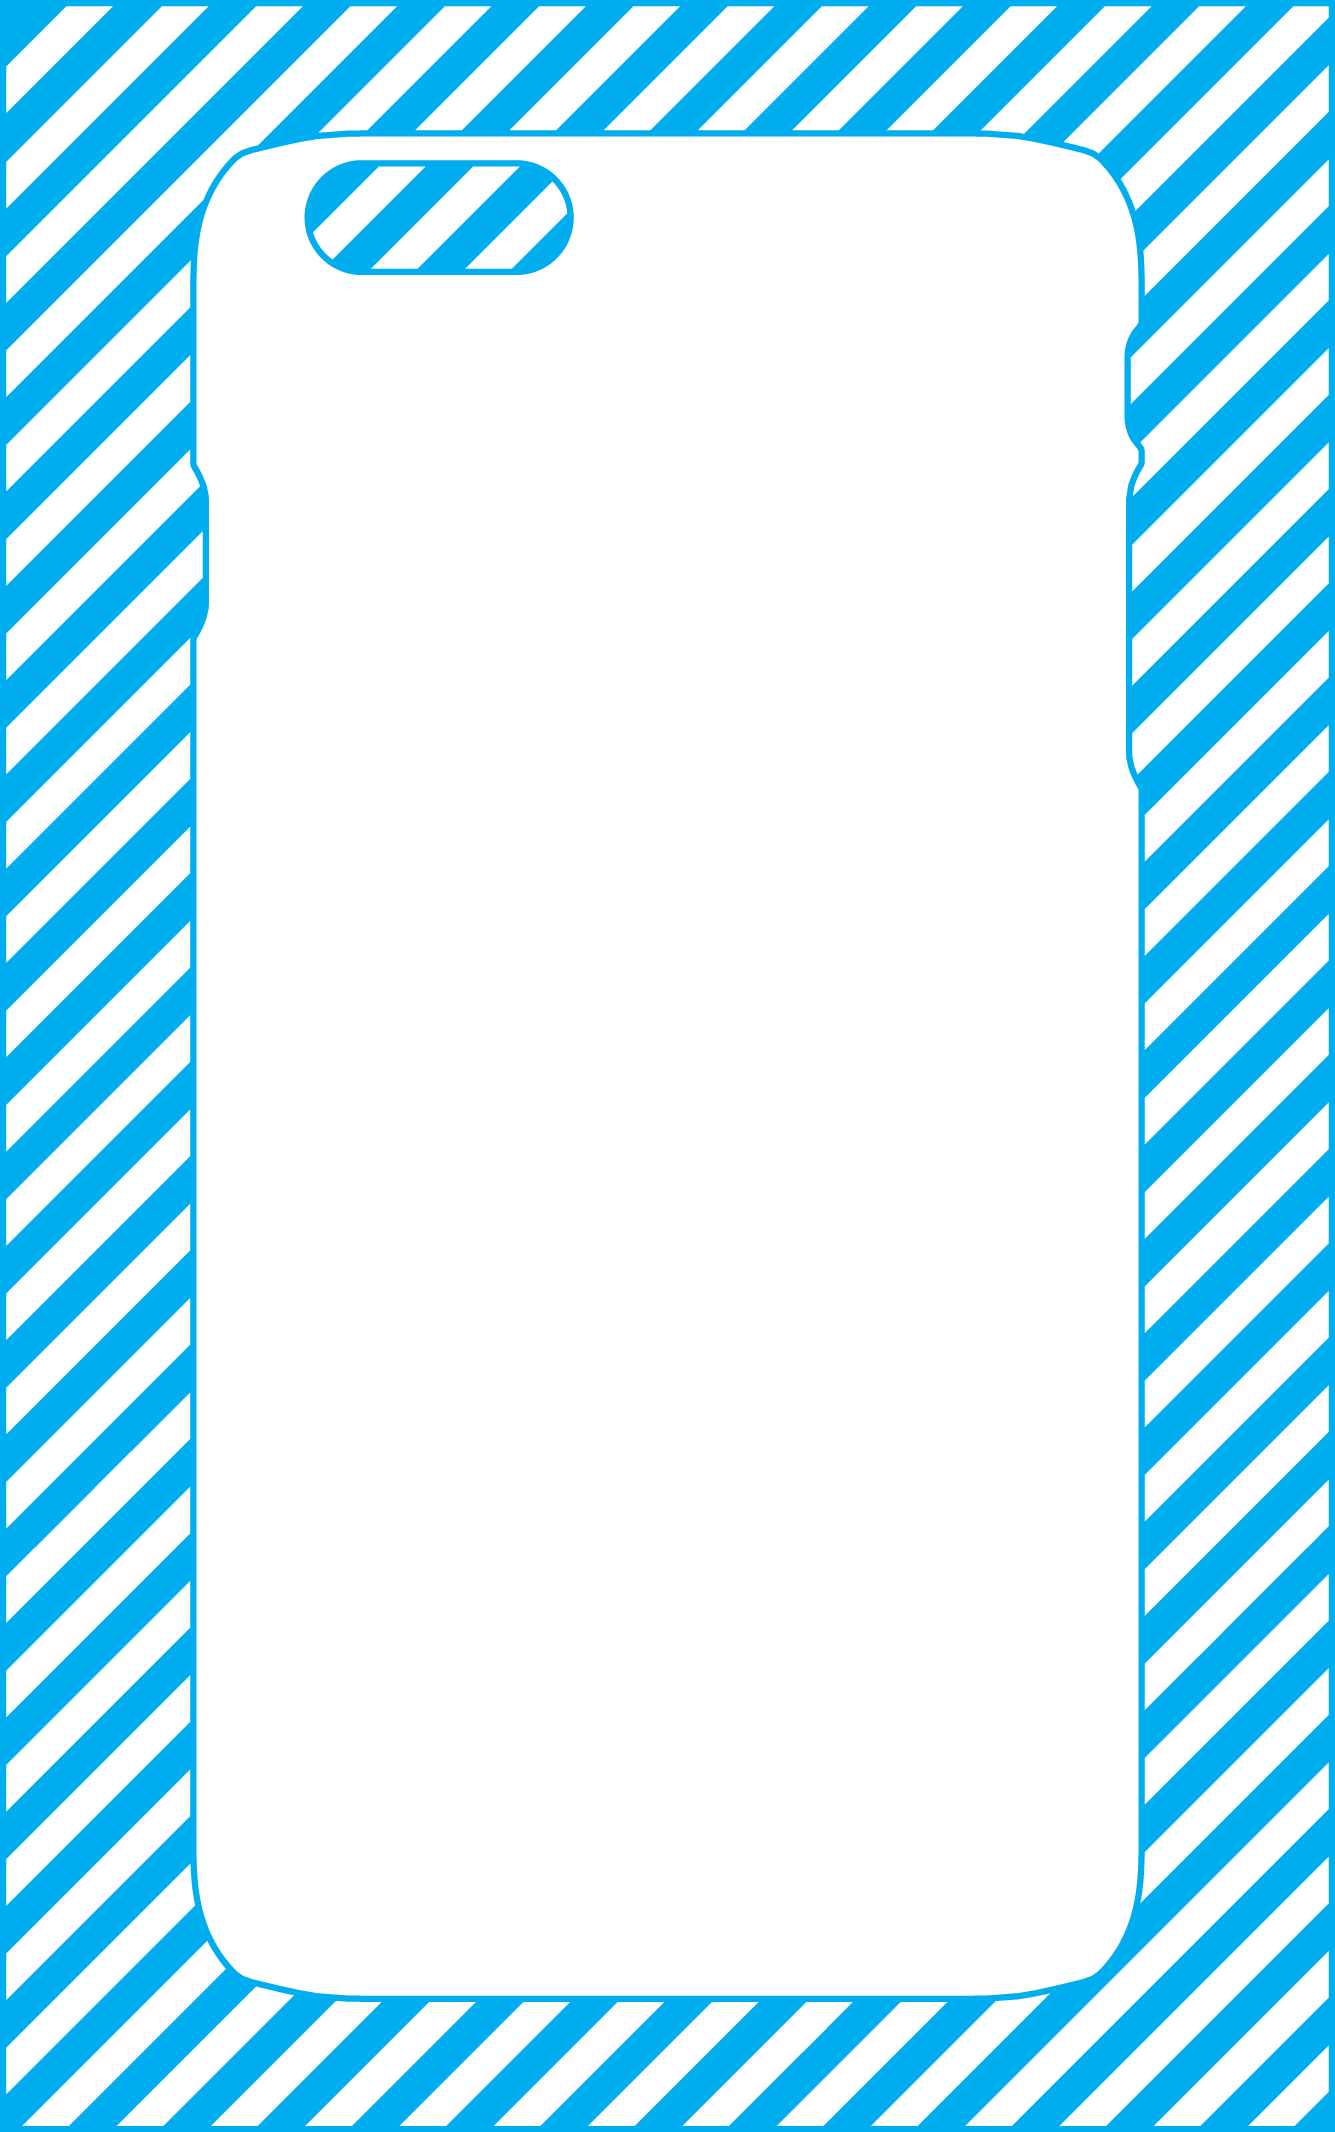 iphone 6 template png